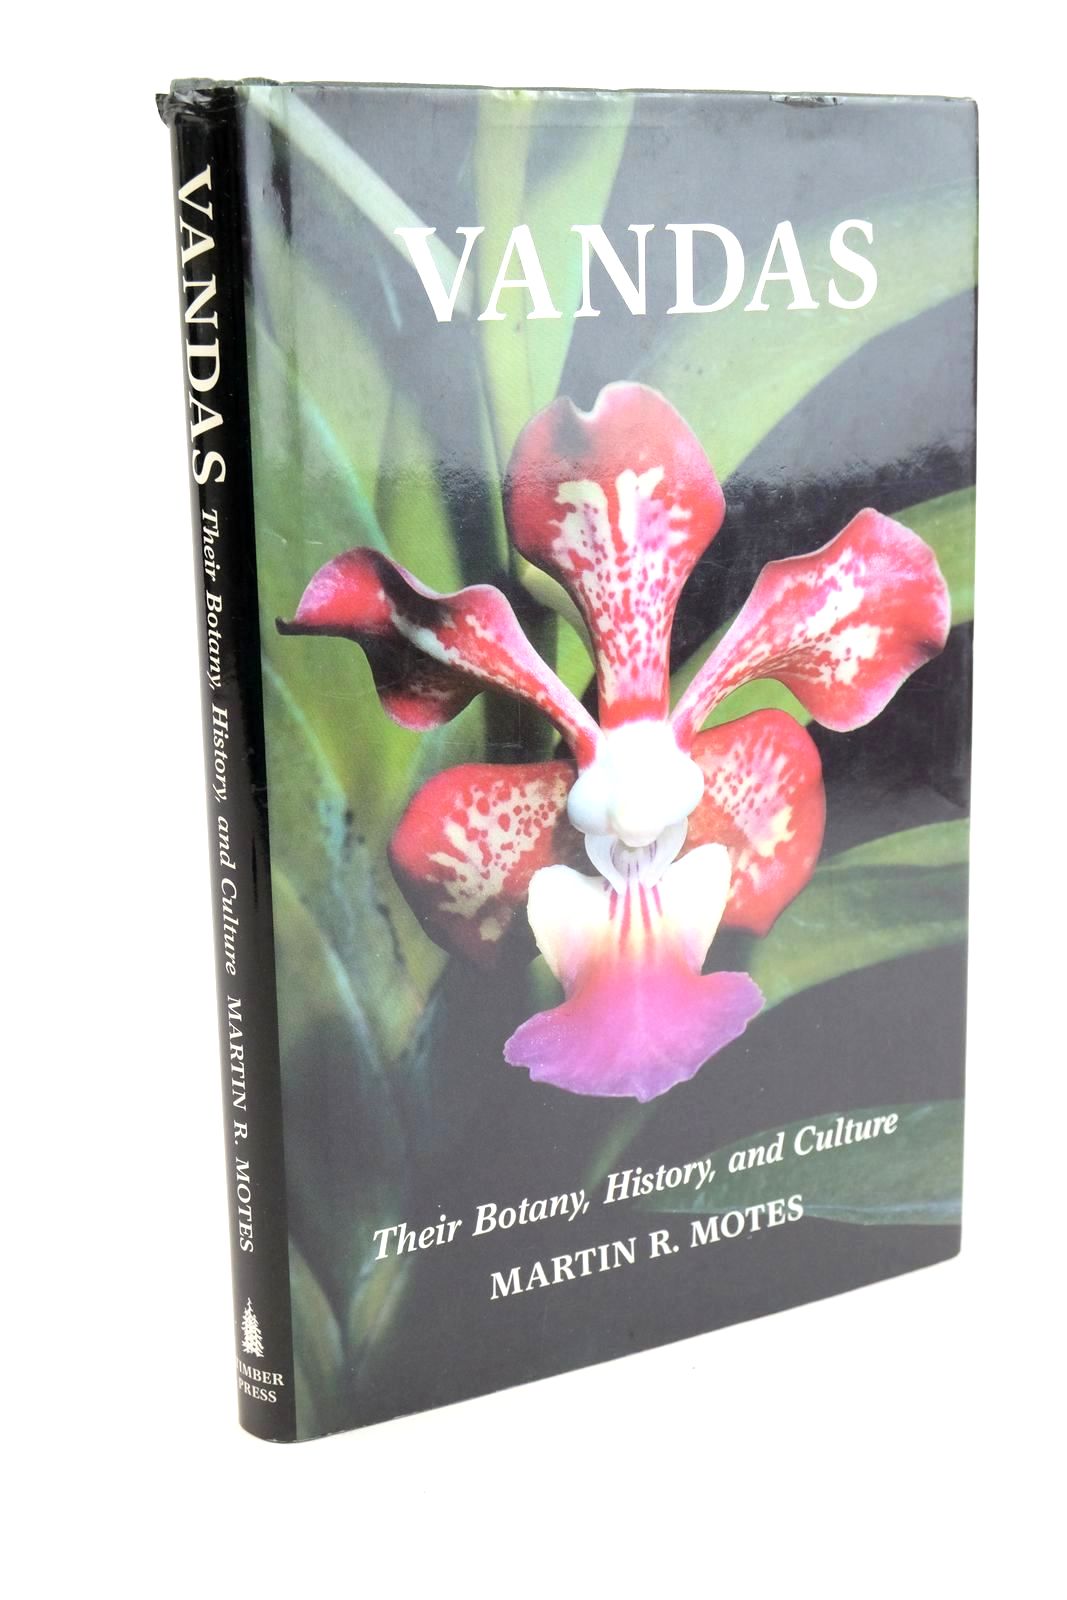 Photo of VANDAS THEIR BOTANY, HISTORY, AND CULTURE written by Motes, Martin R. published by Timber Press (STOCK CODE: 1324016)  for sale by Stella & Rose's Books